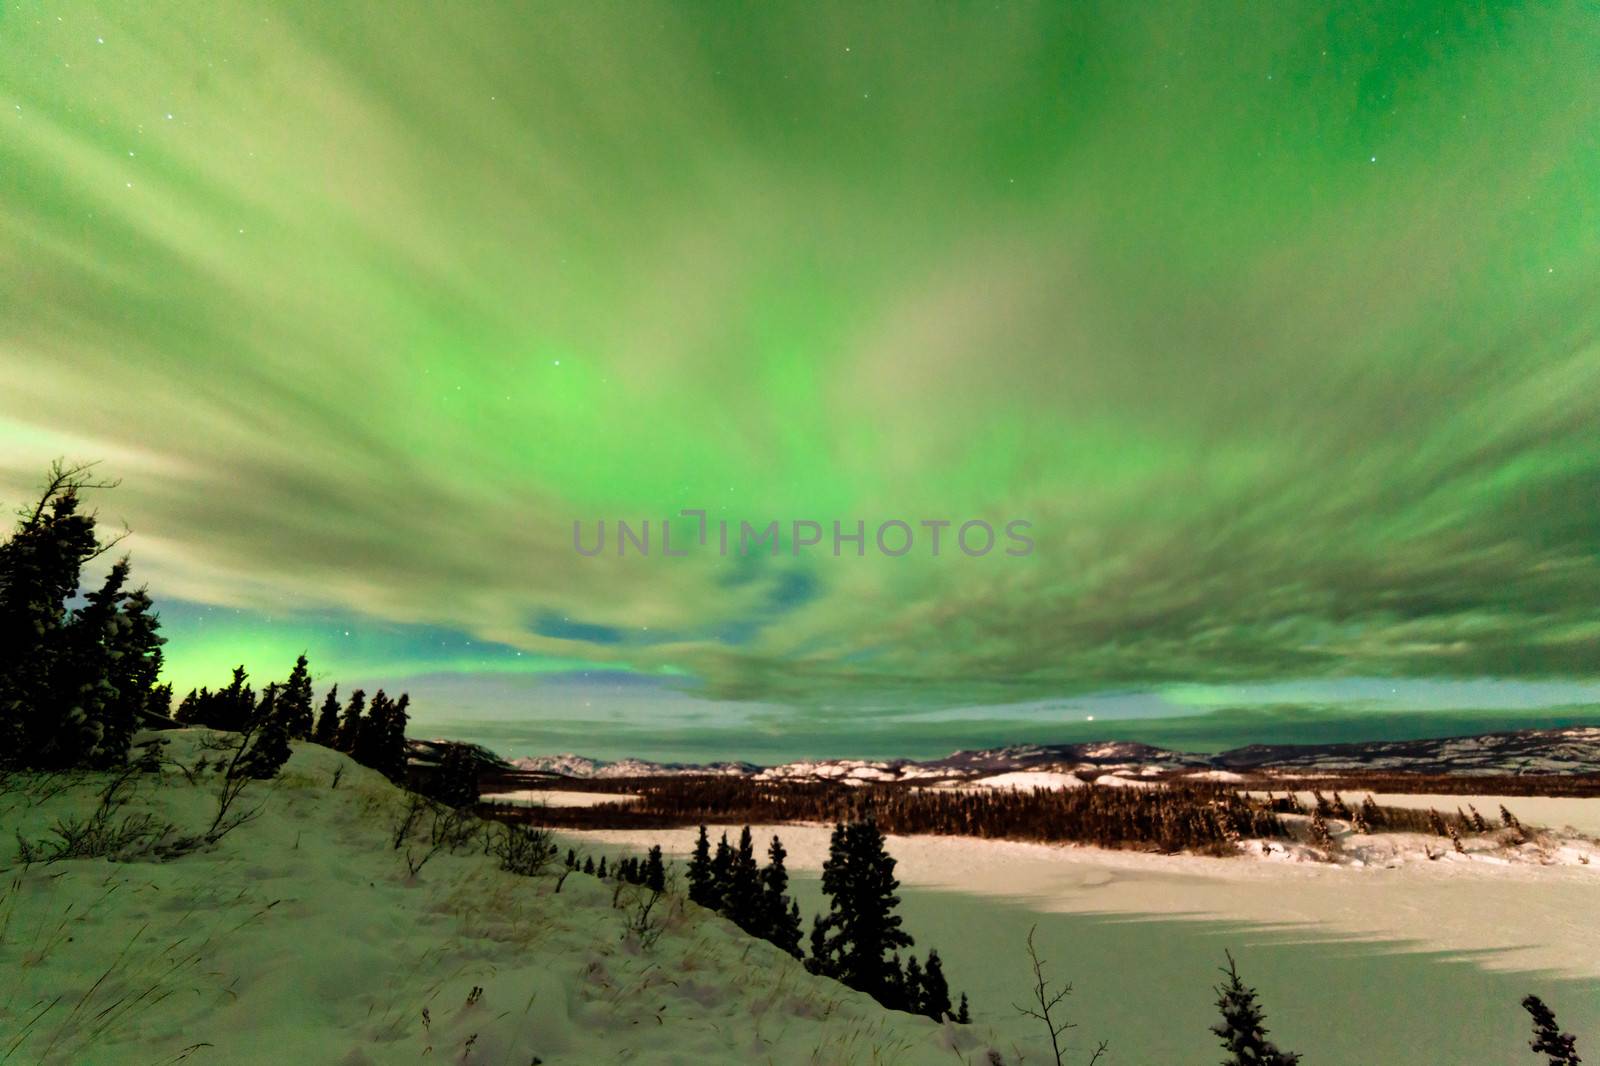 Light clouds and Northern Lights or Aurora borealis or polar lights on night sky over snowy winter landscape of Lake Laberge Yukon Territory Canada